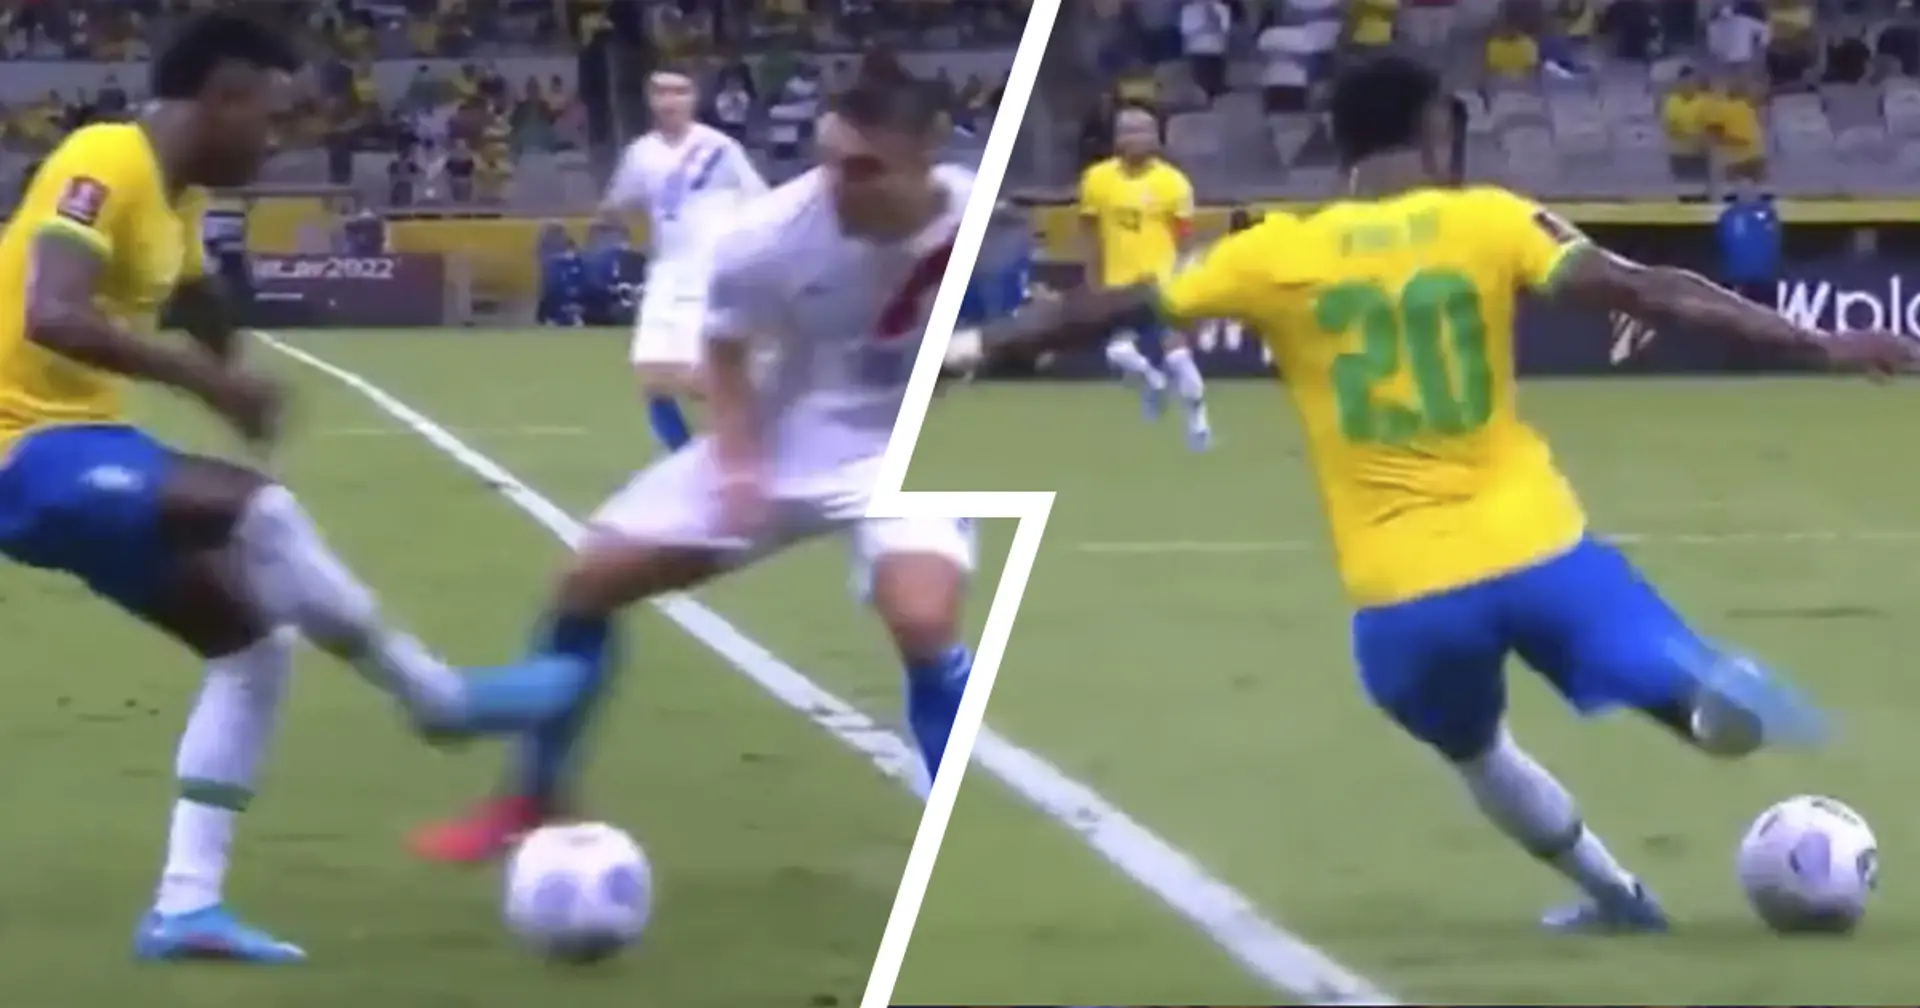 'Went from Neymar to Xabi Alonso in 8 seconds': Vinicius makes headlines with crazy move for Brazil